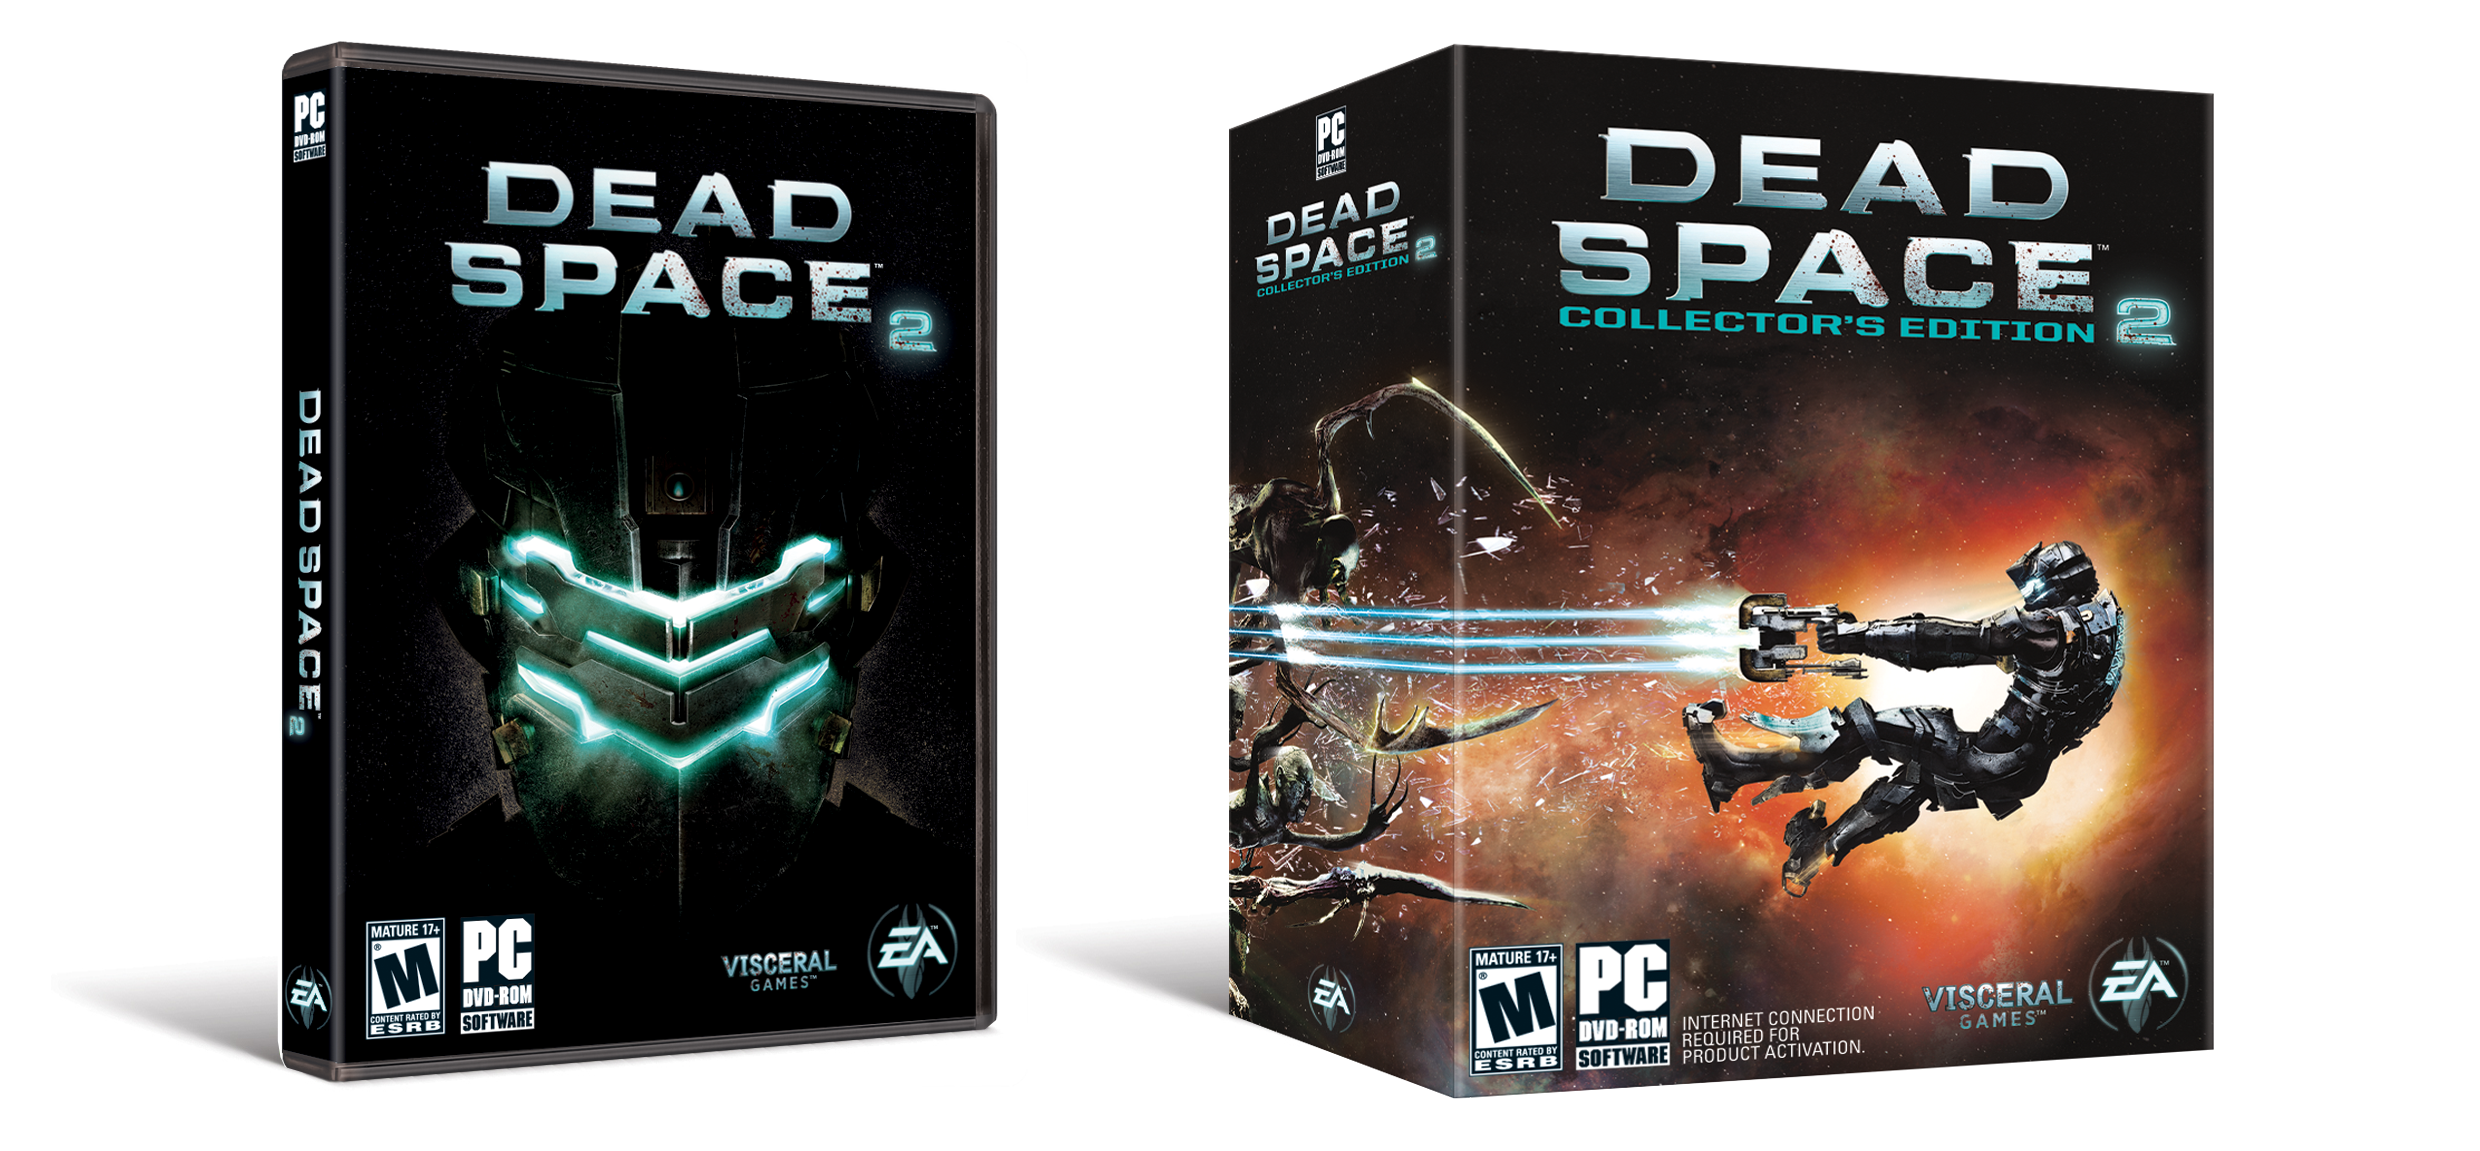 Dead Space 2 + Collector's Edition